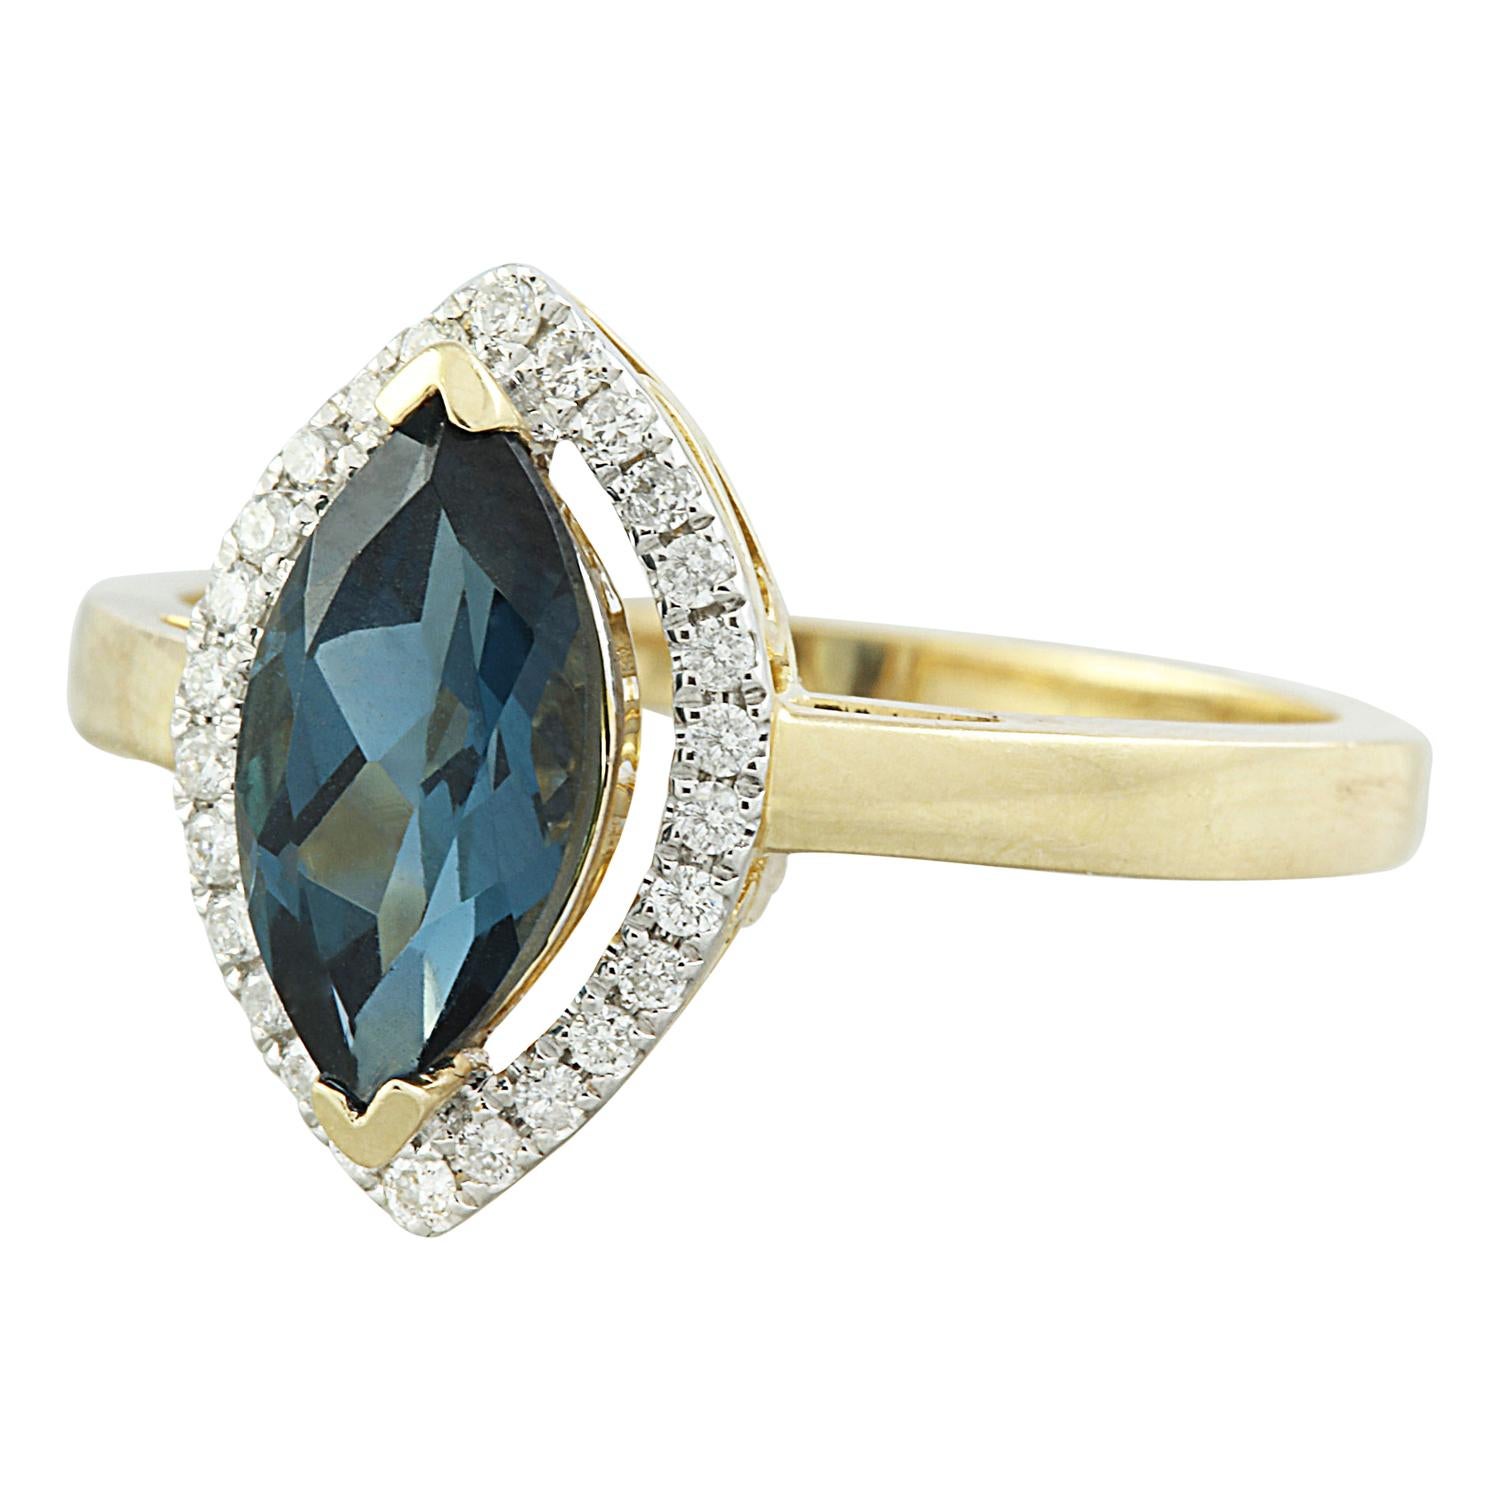 Introducing our captivating 1.32 Carat Natural Topaz Ring, delicately crafted in gleaming 14 Karat Solid Yellow Gold. Authenticated with a stamped mark of 14K, this enchanting ring is designed to adorn your finger with timeless elegance. Weighing a